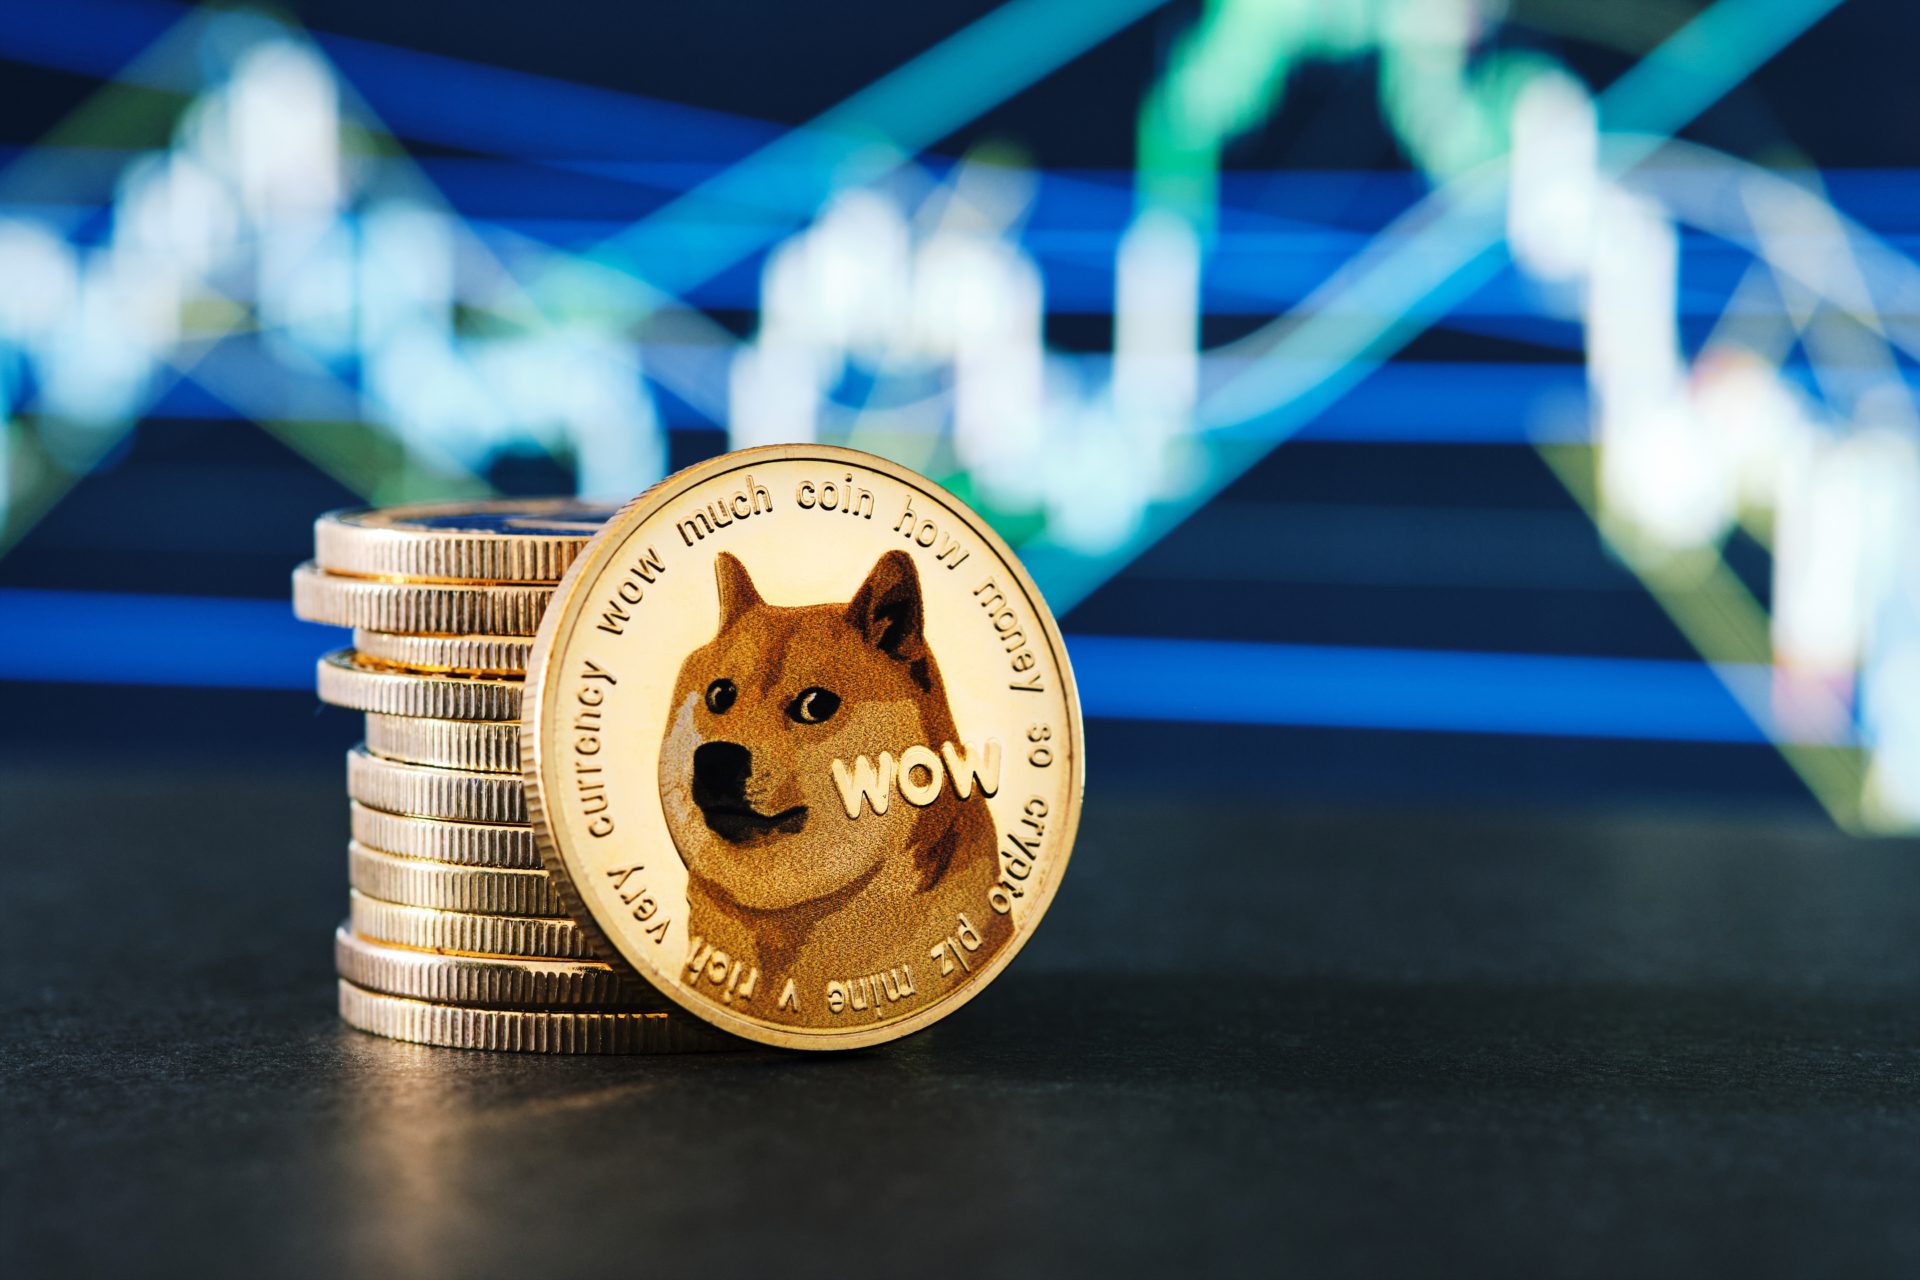 If this happens, the price of Dogecoin could rise to $1